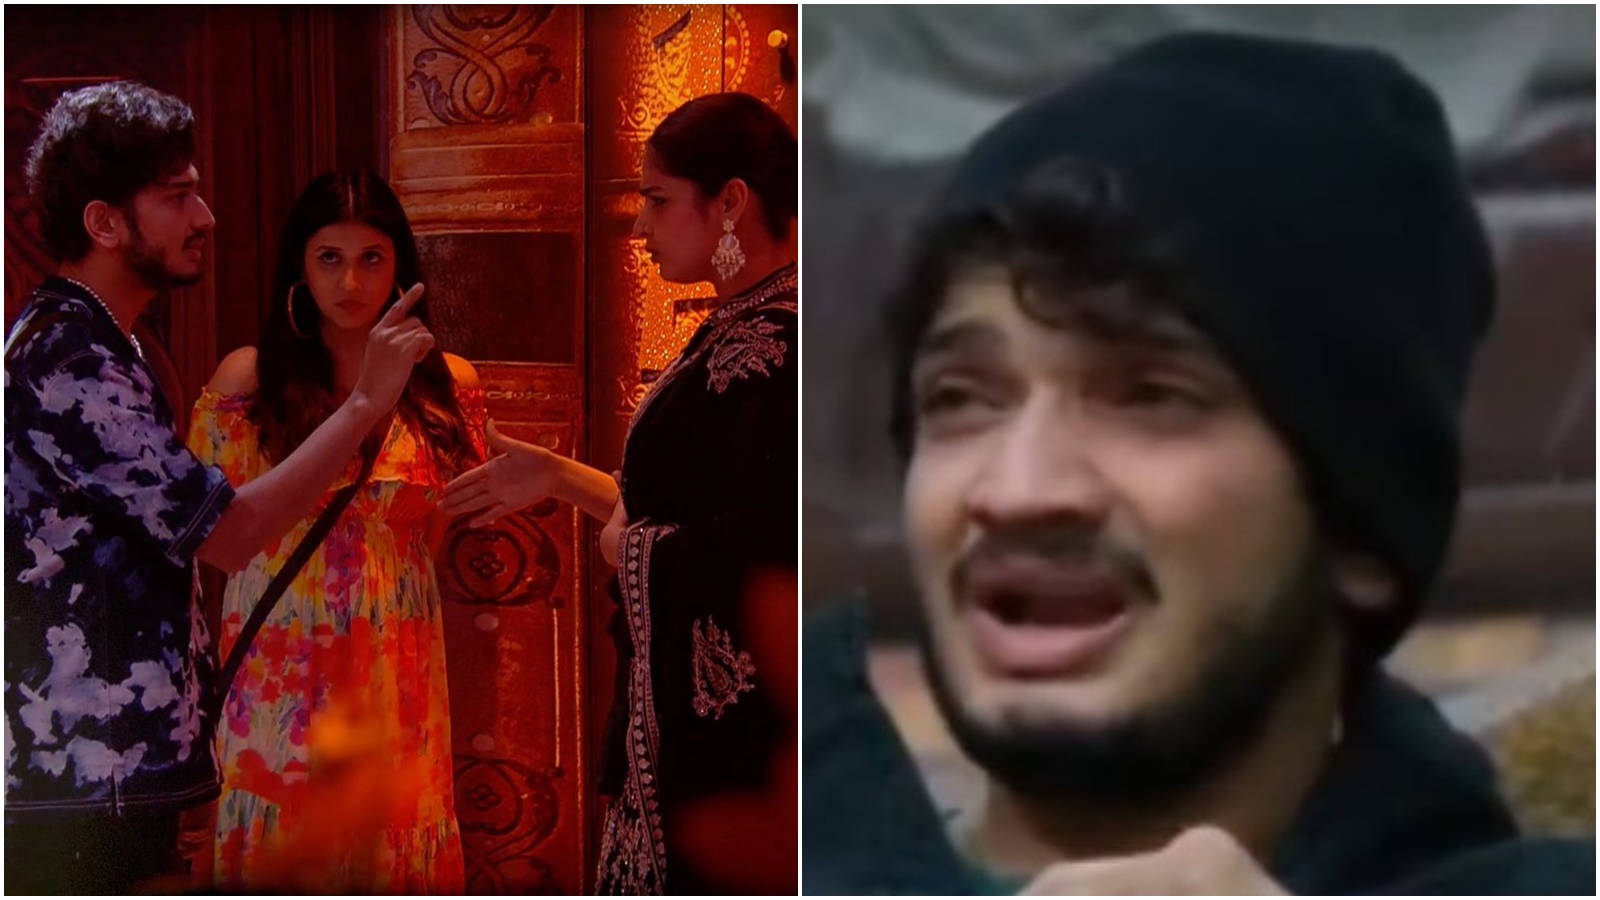 Munawar Faruqui breaks down as Ayesha Khan accuses him of being involved  with multiple women: 'If Bigg Boss opens the door, I will walk out